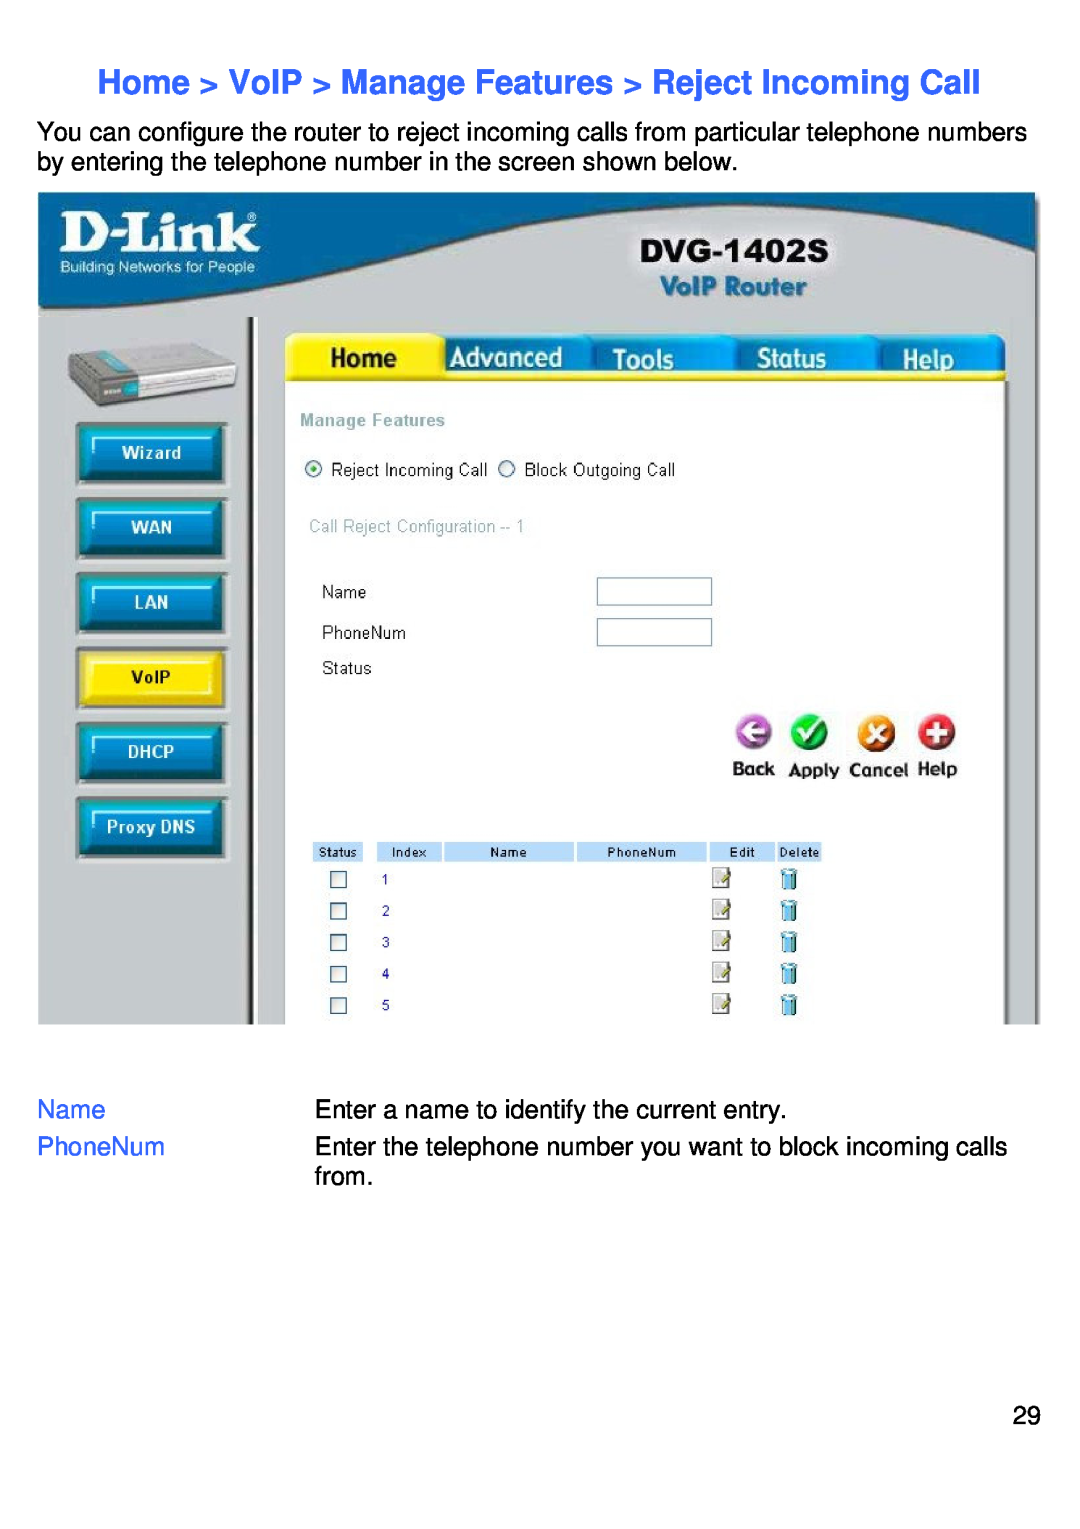 D-Link DVG-1402S Home VoIP Manage Features Reject Incoming Call, Name, Enter a name to identify the current entry, from 